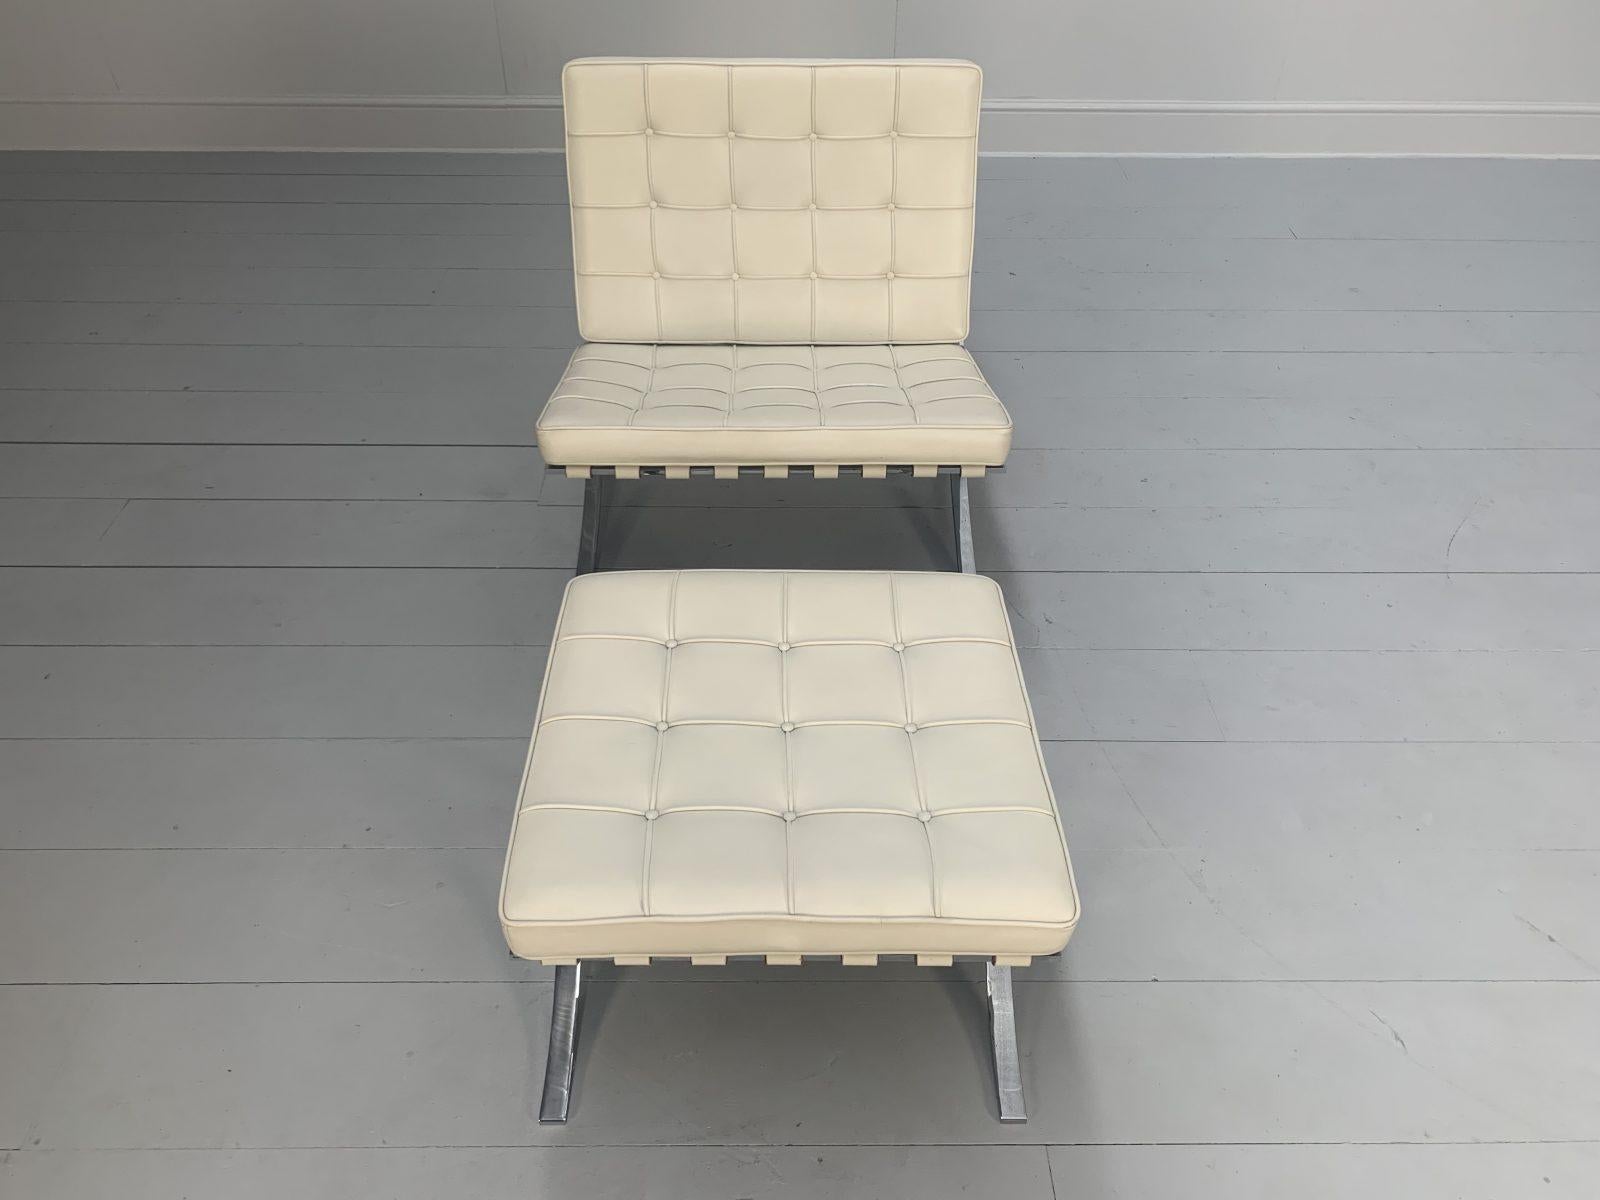 Contemporary Knoll Studio “Barcelona” Lounge Chair & Ottoman” Suite in Ivory Leather